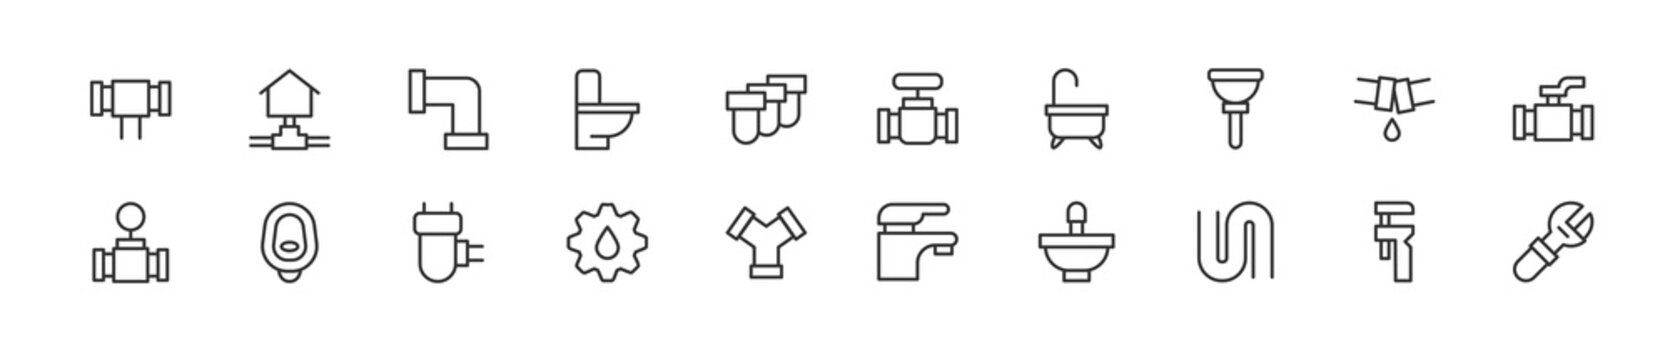 Editable vector pack of plumbing line icons.